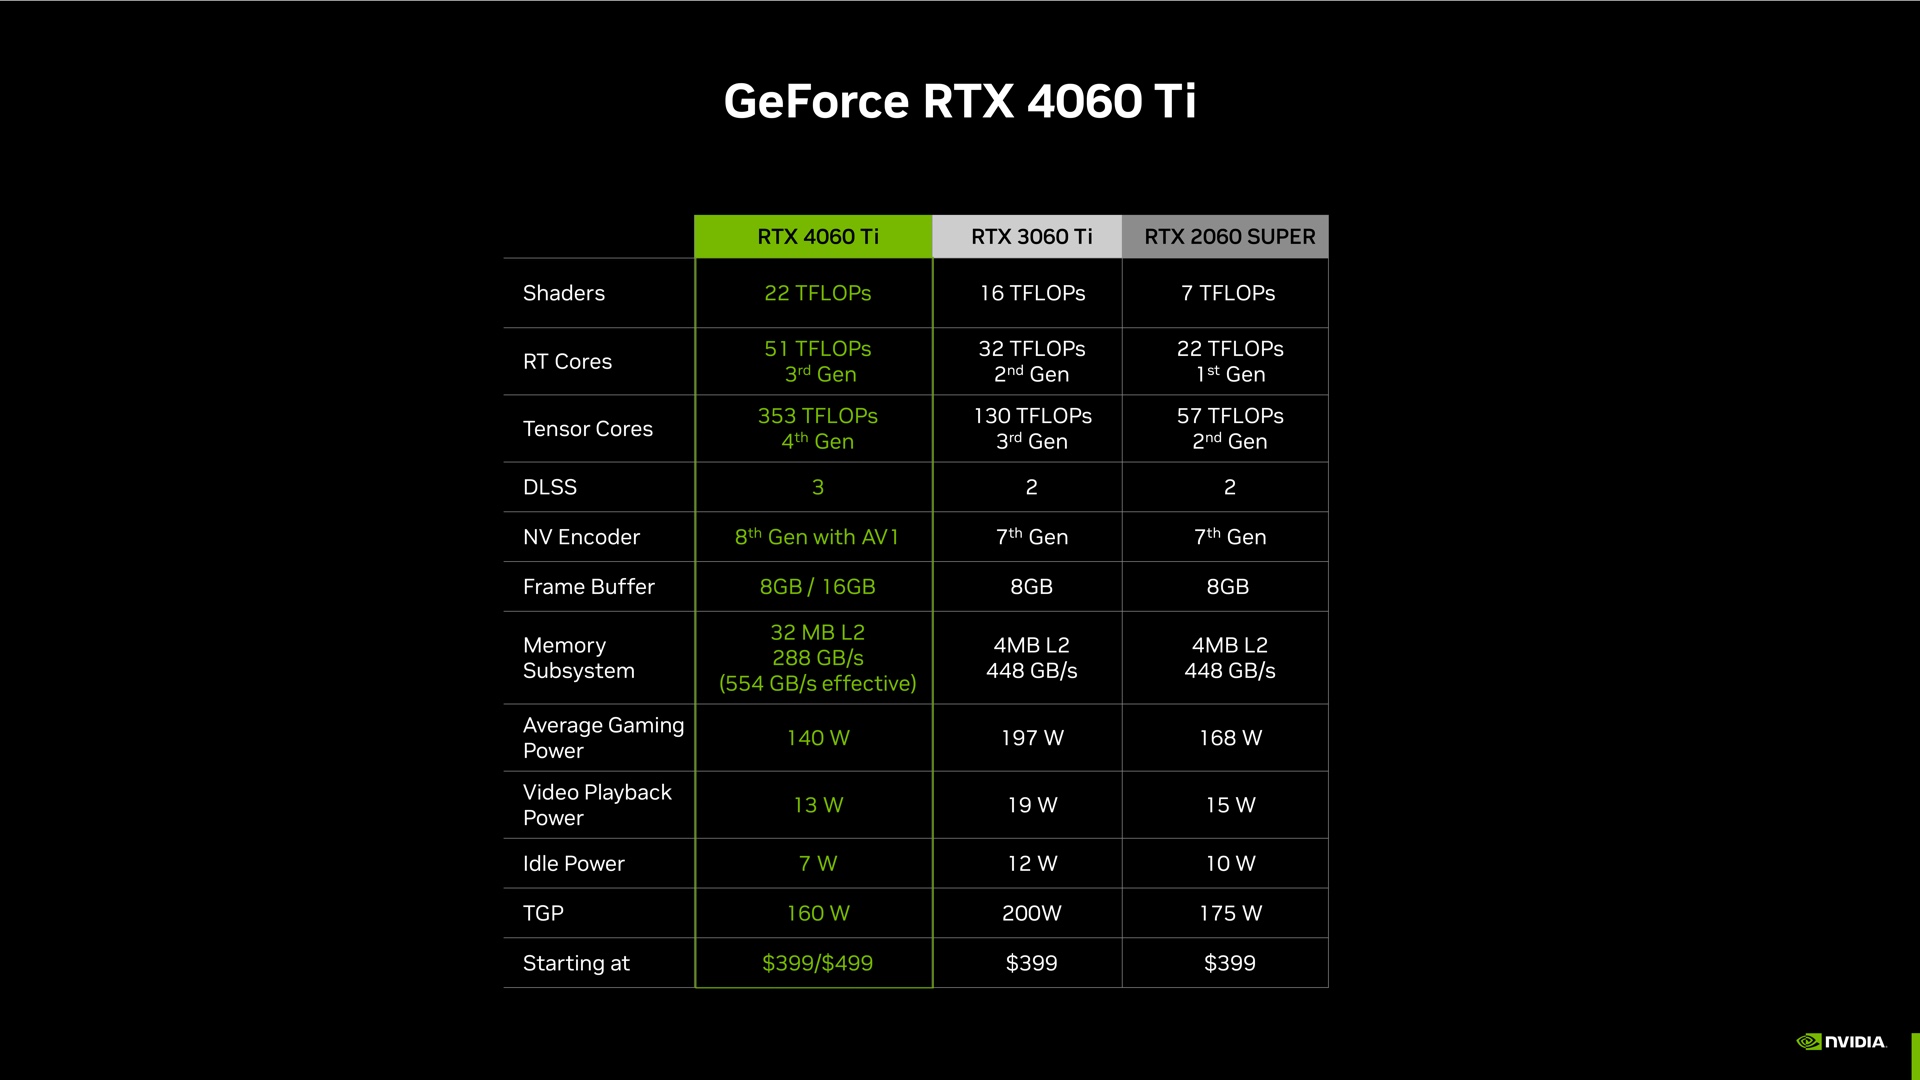 Nvidia's press briefing used TFLOP numbers instead of the number of cores or memory bus width here, because those numbers don't look very good out of context.